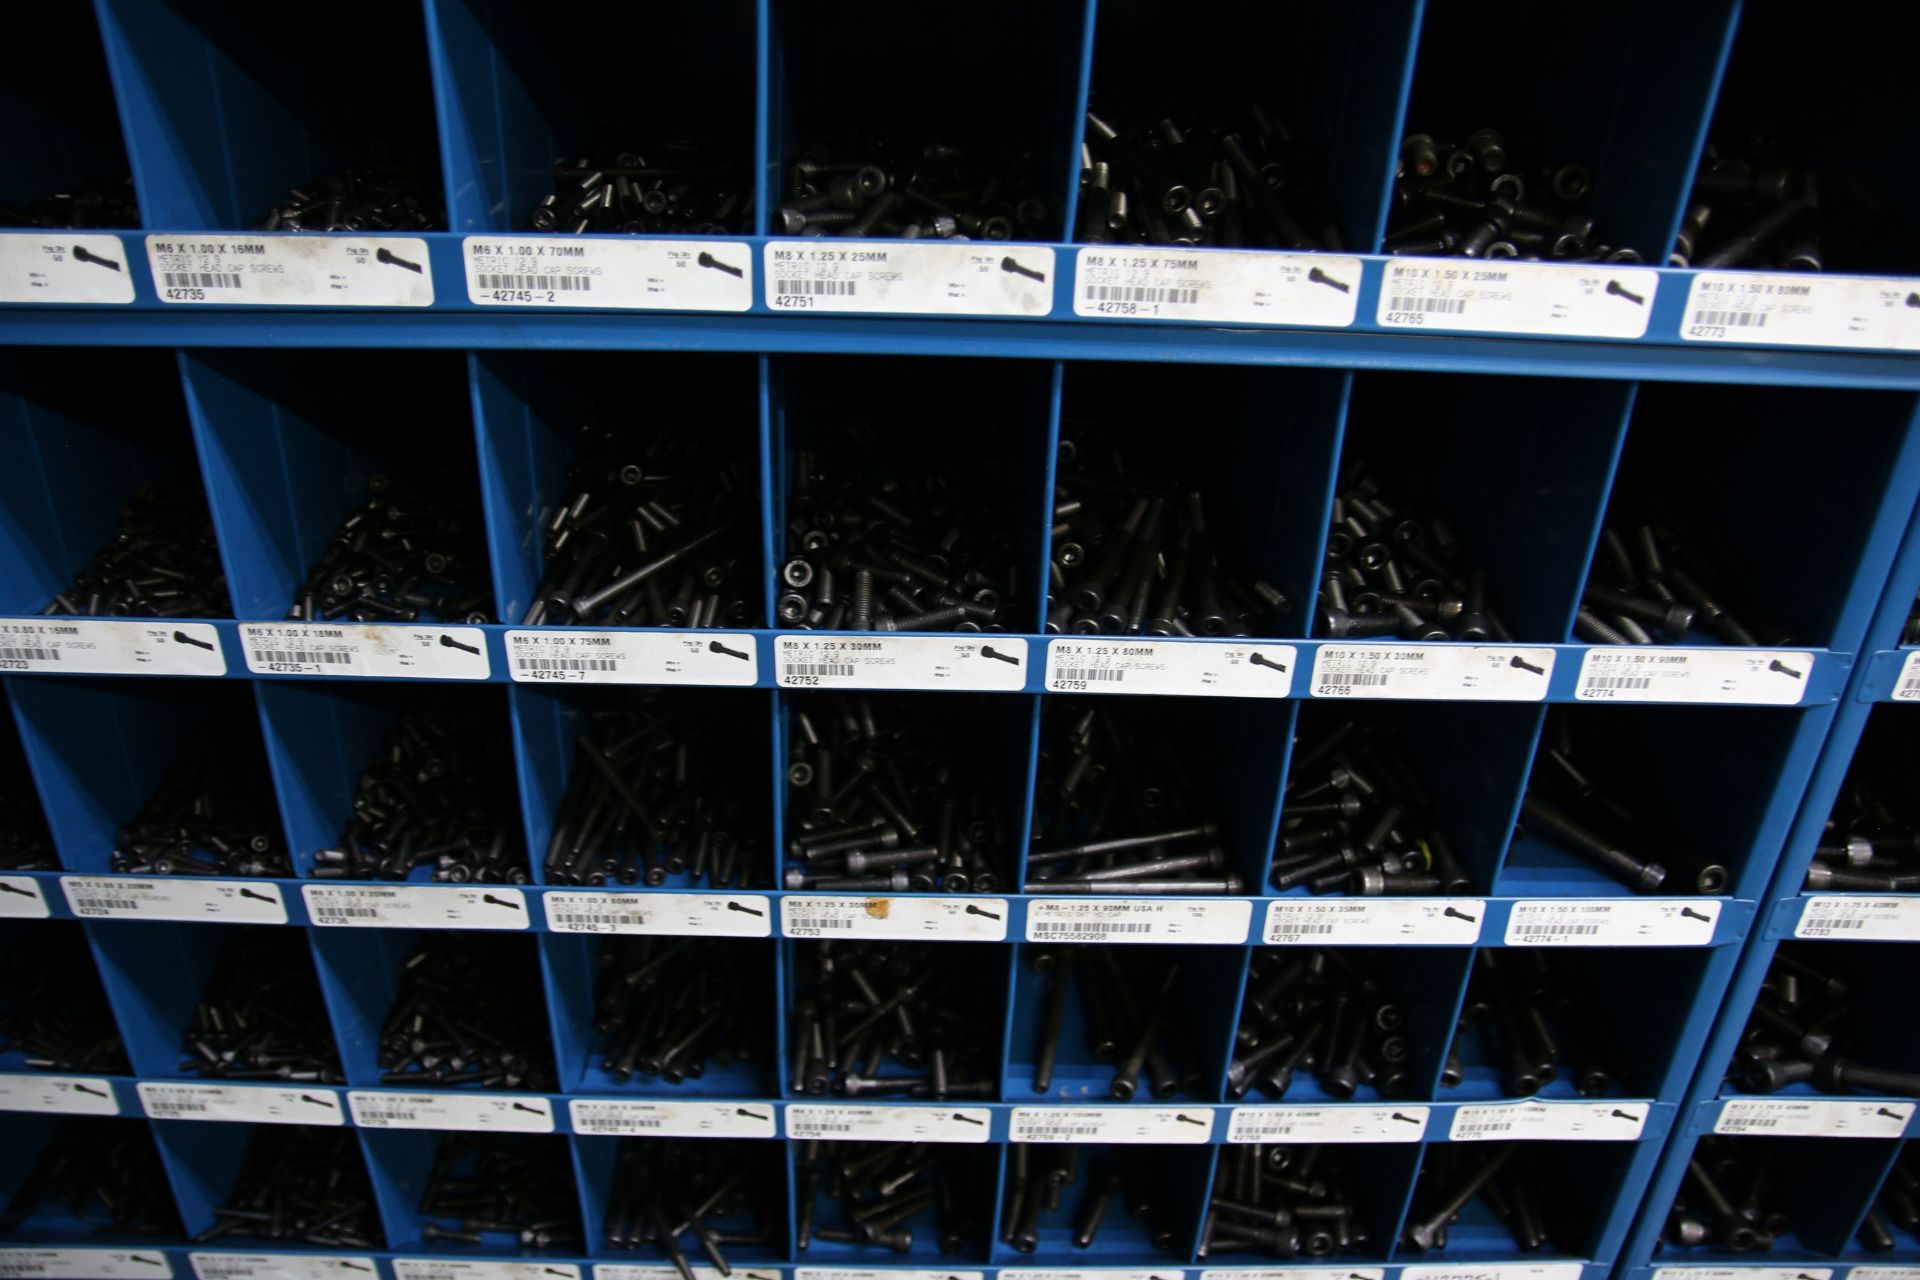 Steel Hardware Bins with Socket Head Bolts - Image 3 of 4